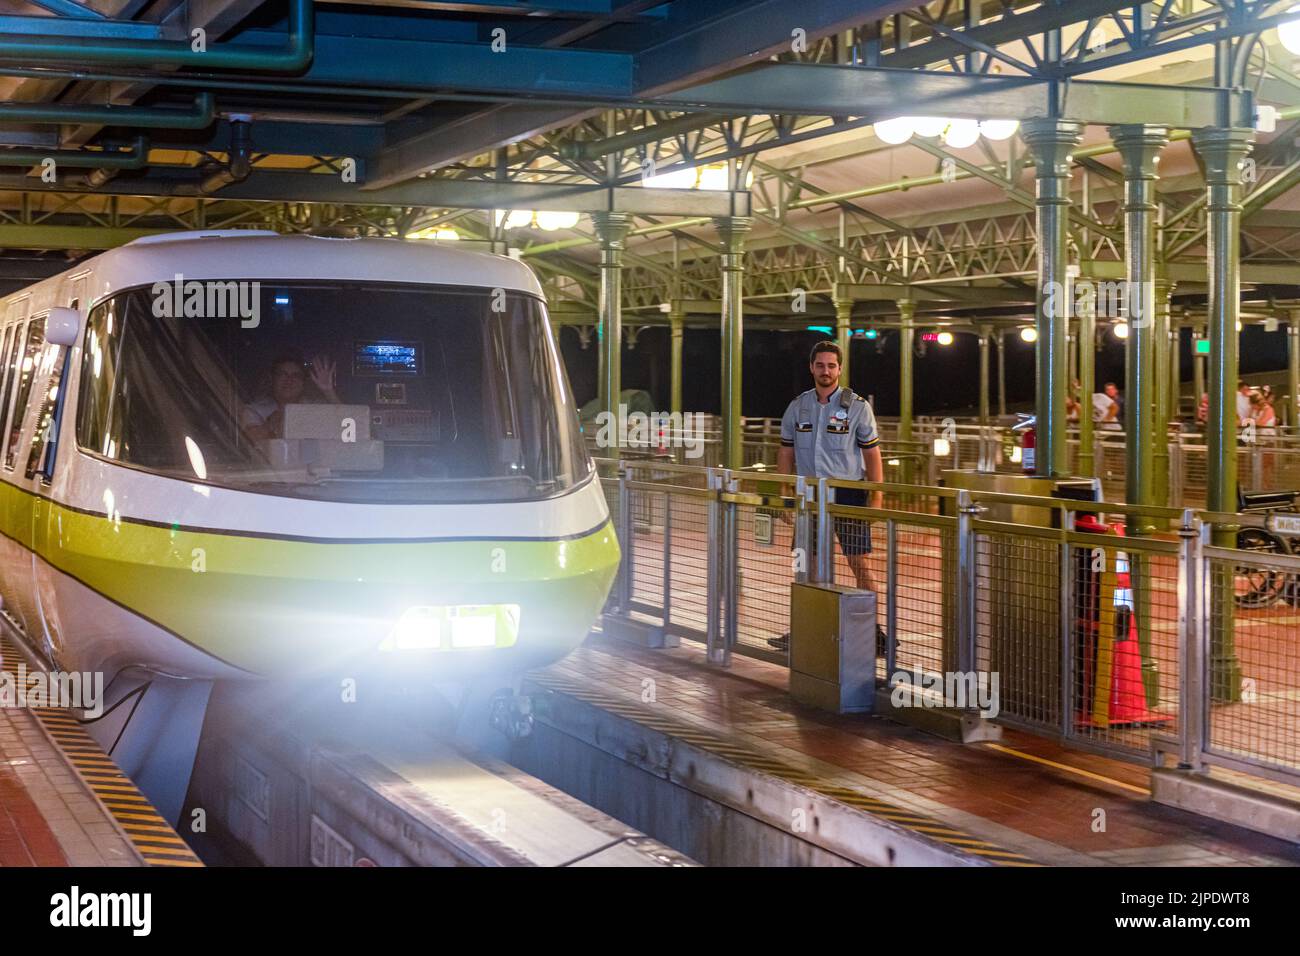 Light train arriving at a station of the monorail system. It is night time so the headlights are on. Stock Photo